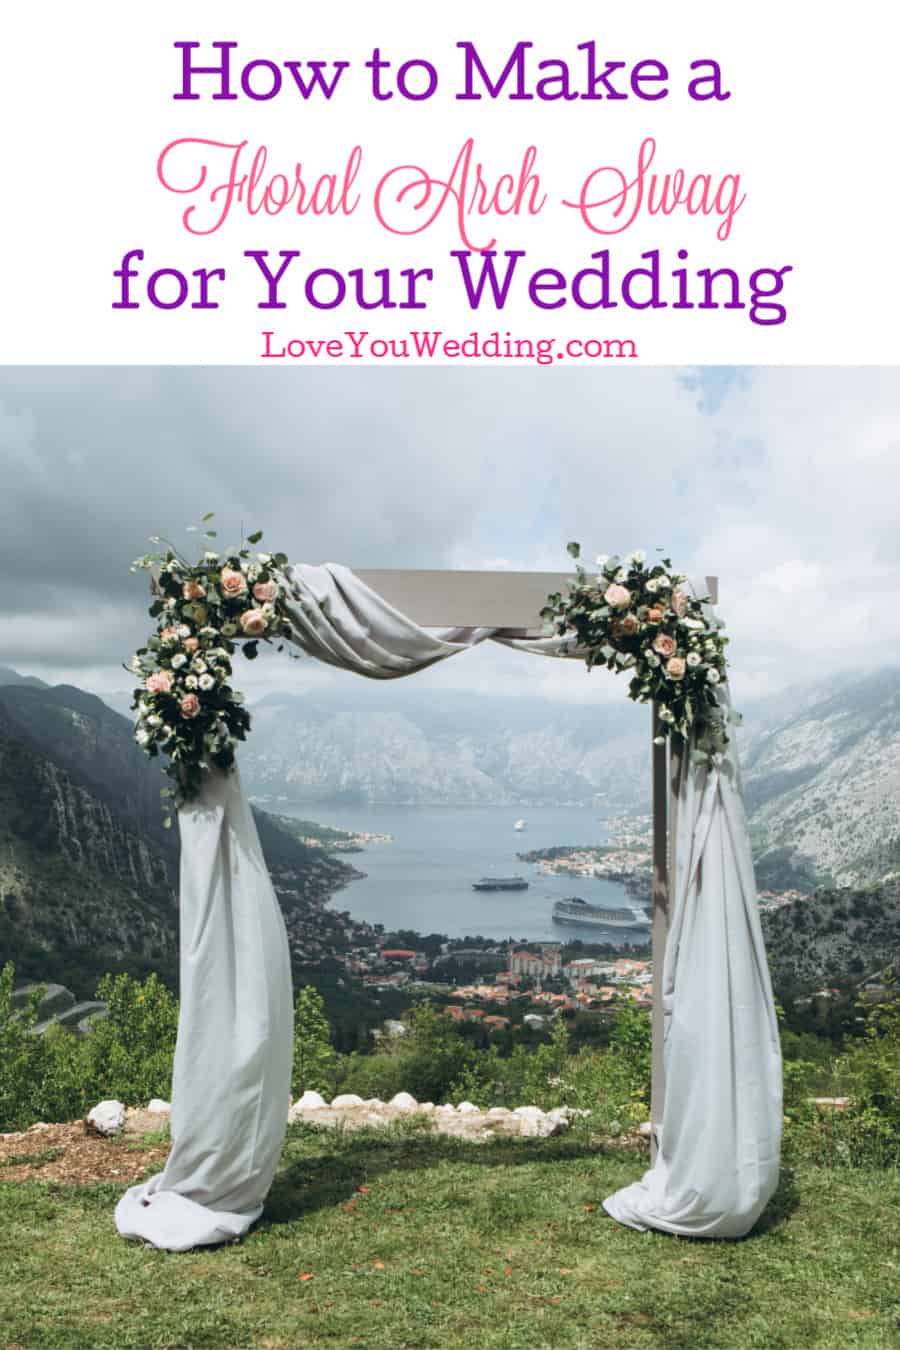 Knowing how to make a gorgeous flower arch for your wedding arch can save you a lot of money. Follow our step-by-step guide for a gorgeous look!